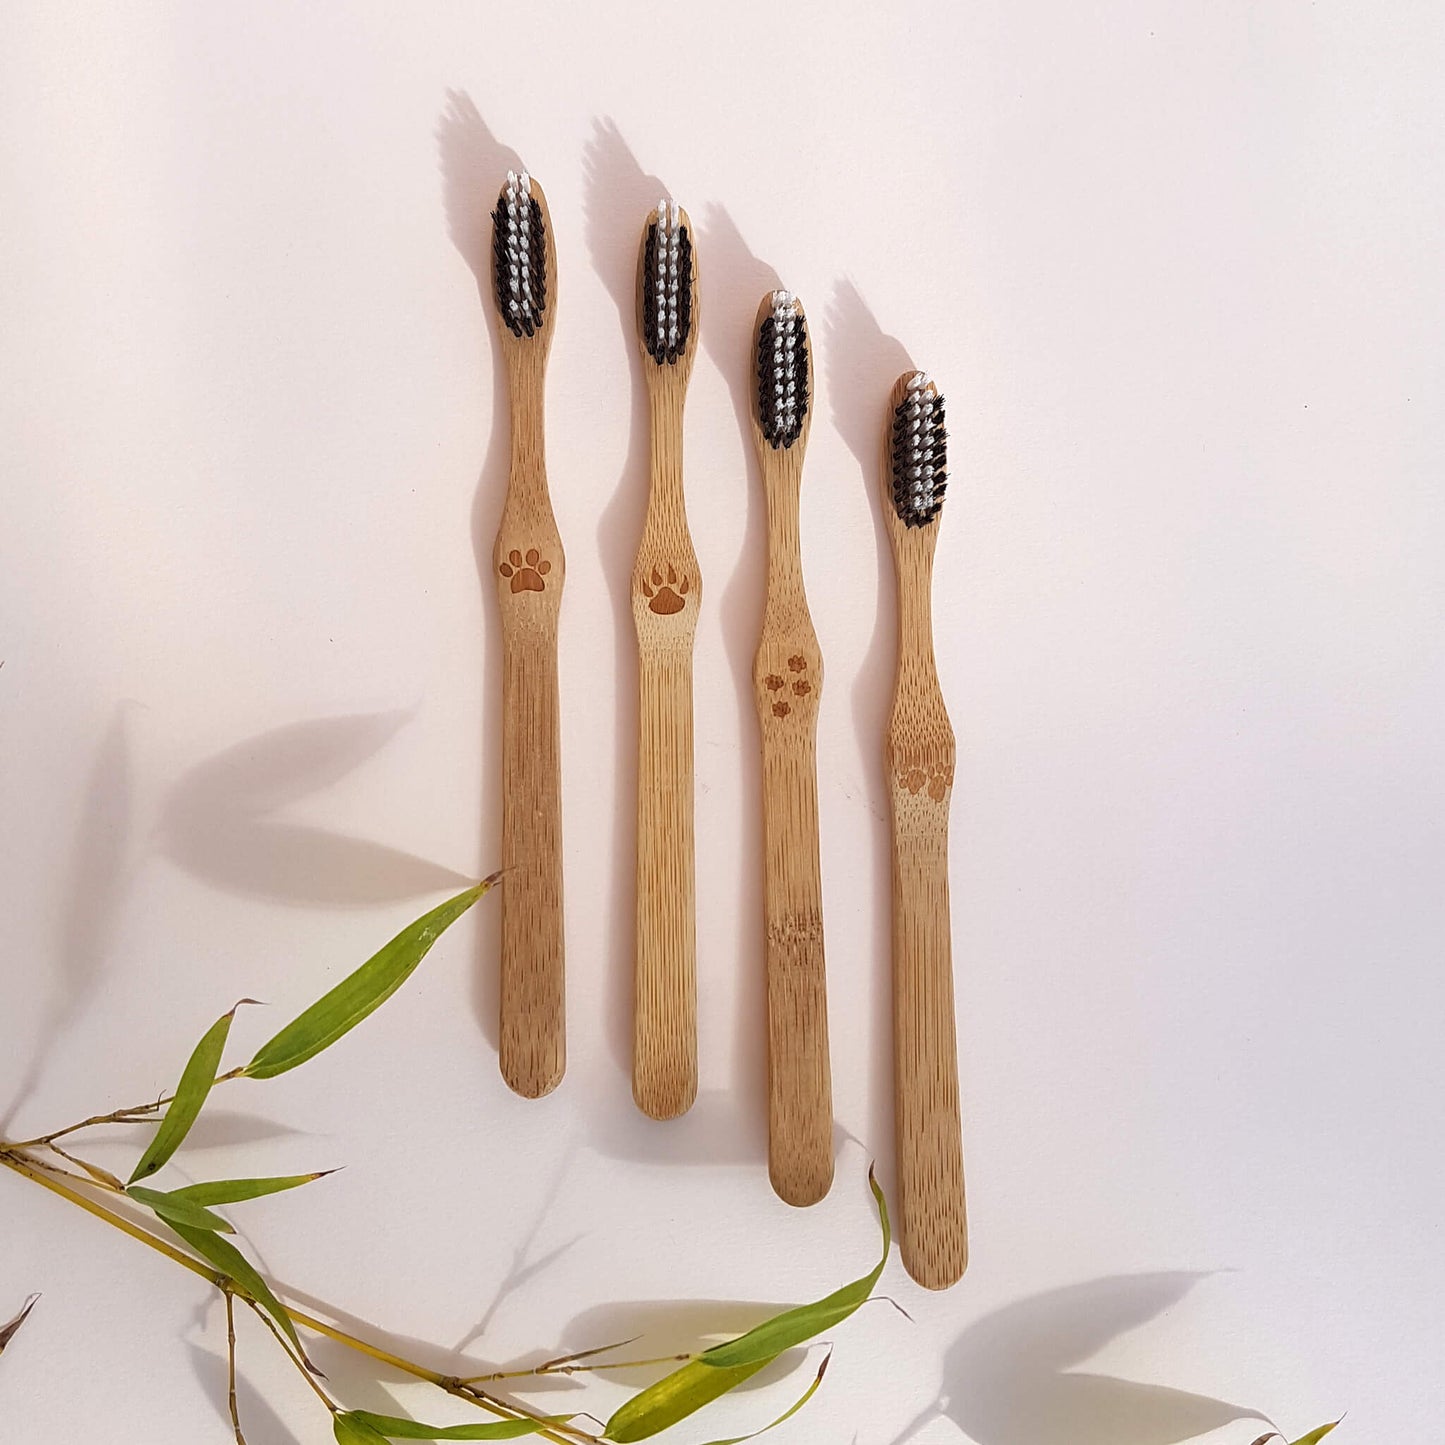 Organic Bamboo Toothbrushes - 4 pack - Unik by Nature